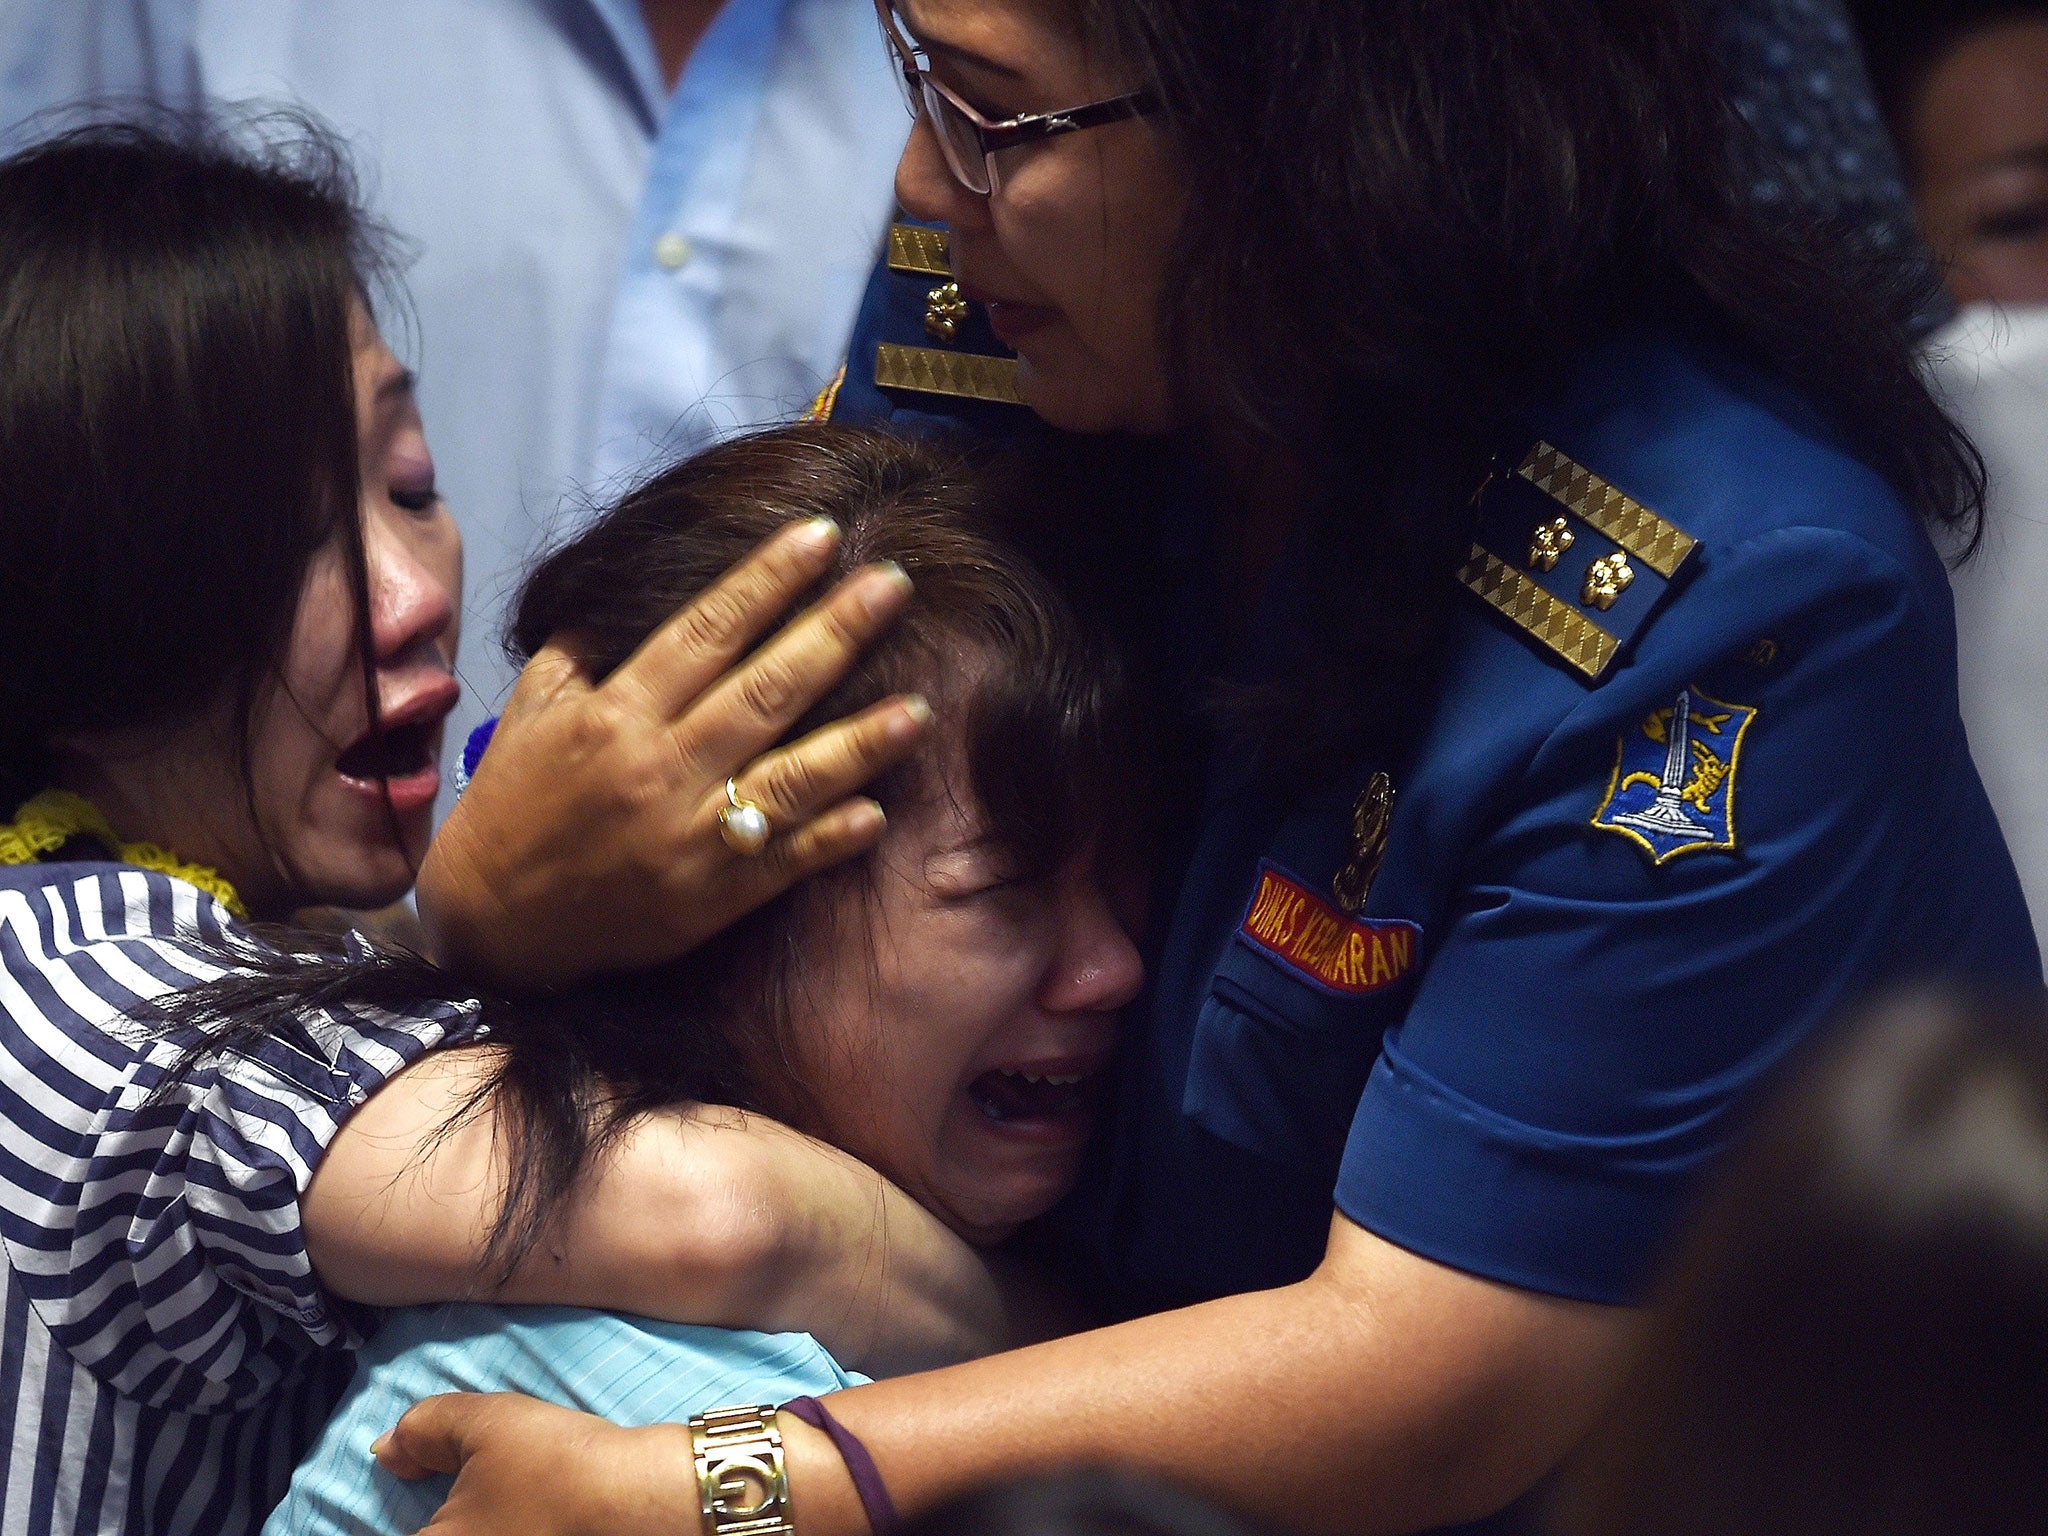 Family members of passengers onboard the missing Malaysian air carrier AirAsia flight QZ8501 react after watching news reports showing an unidentified body floating in the Java sea